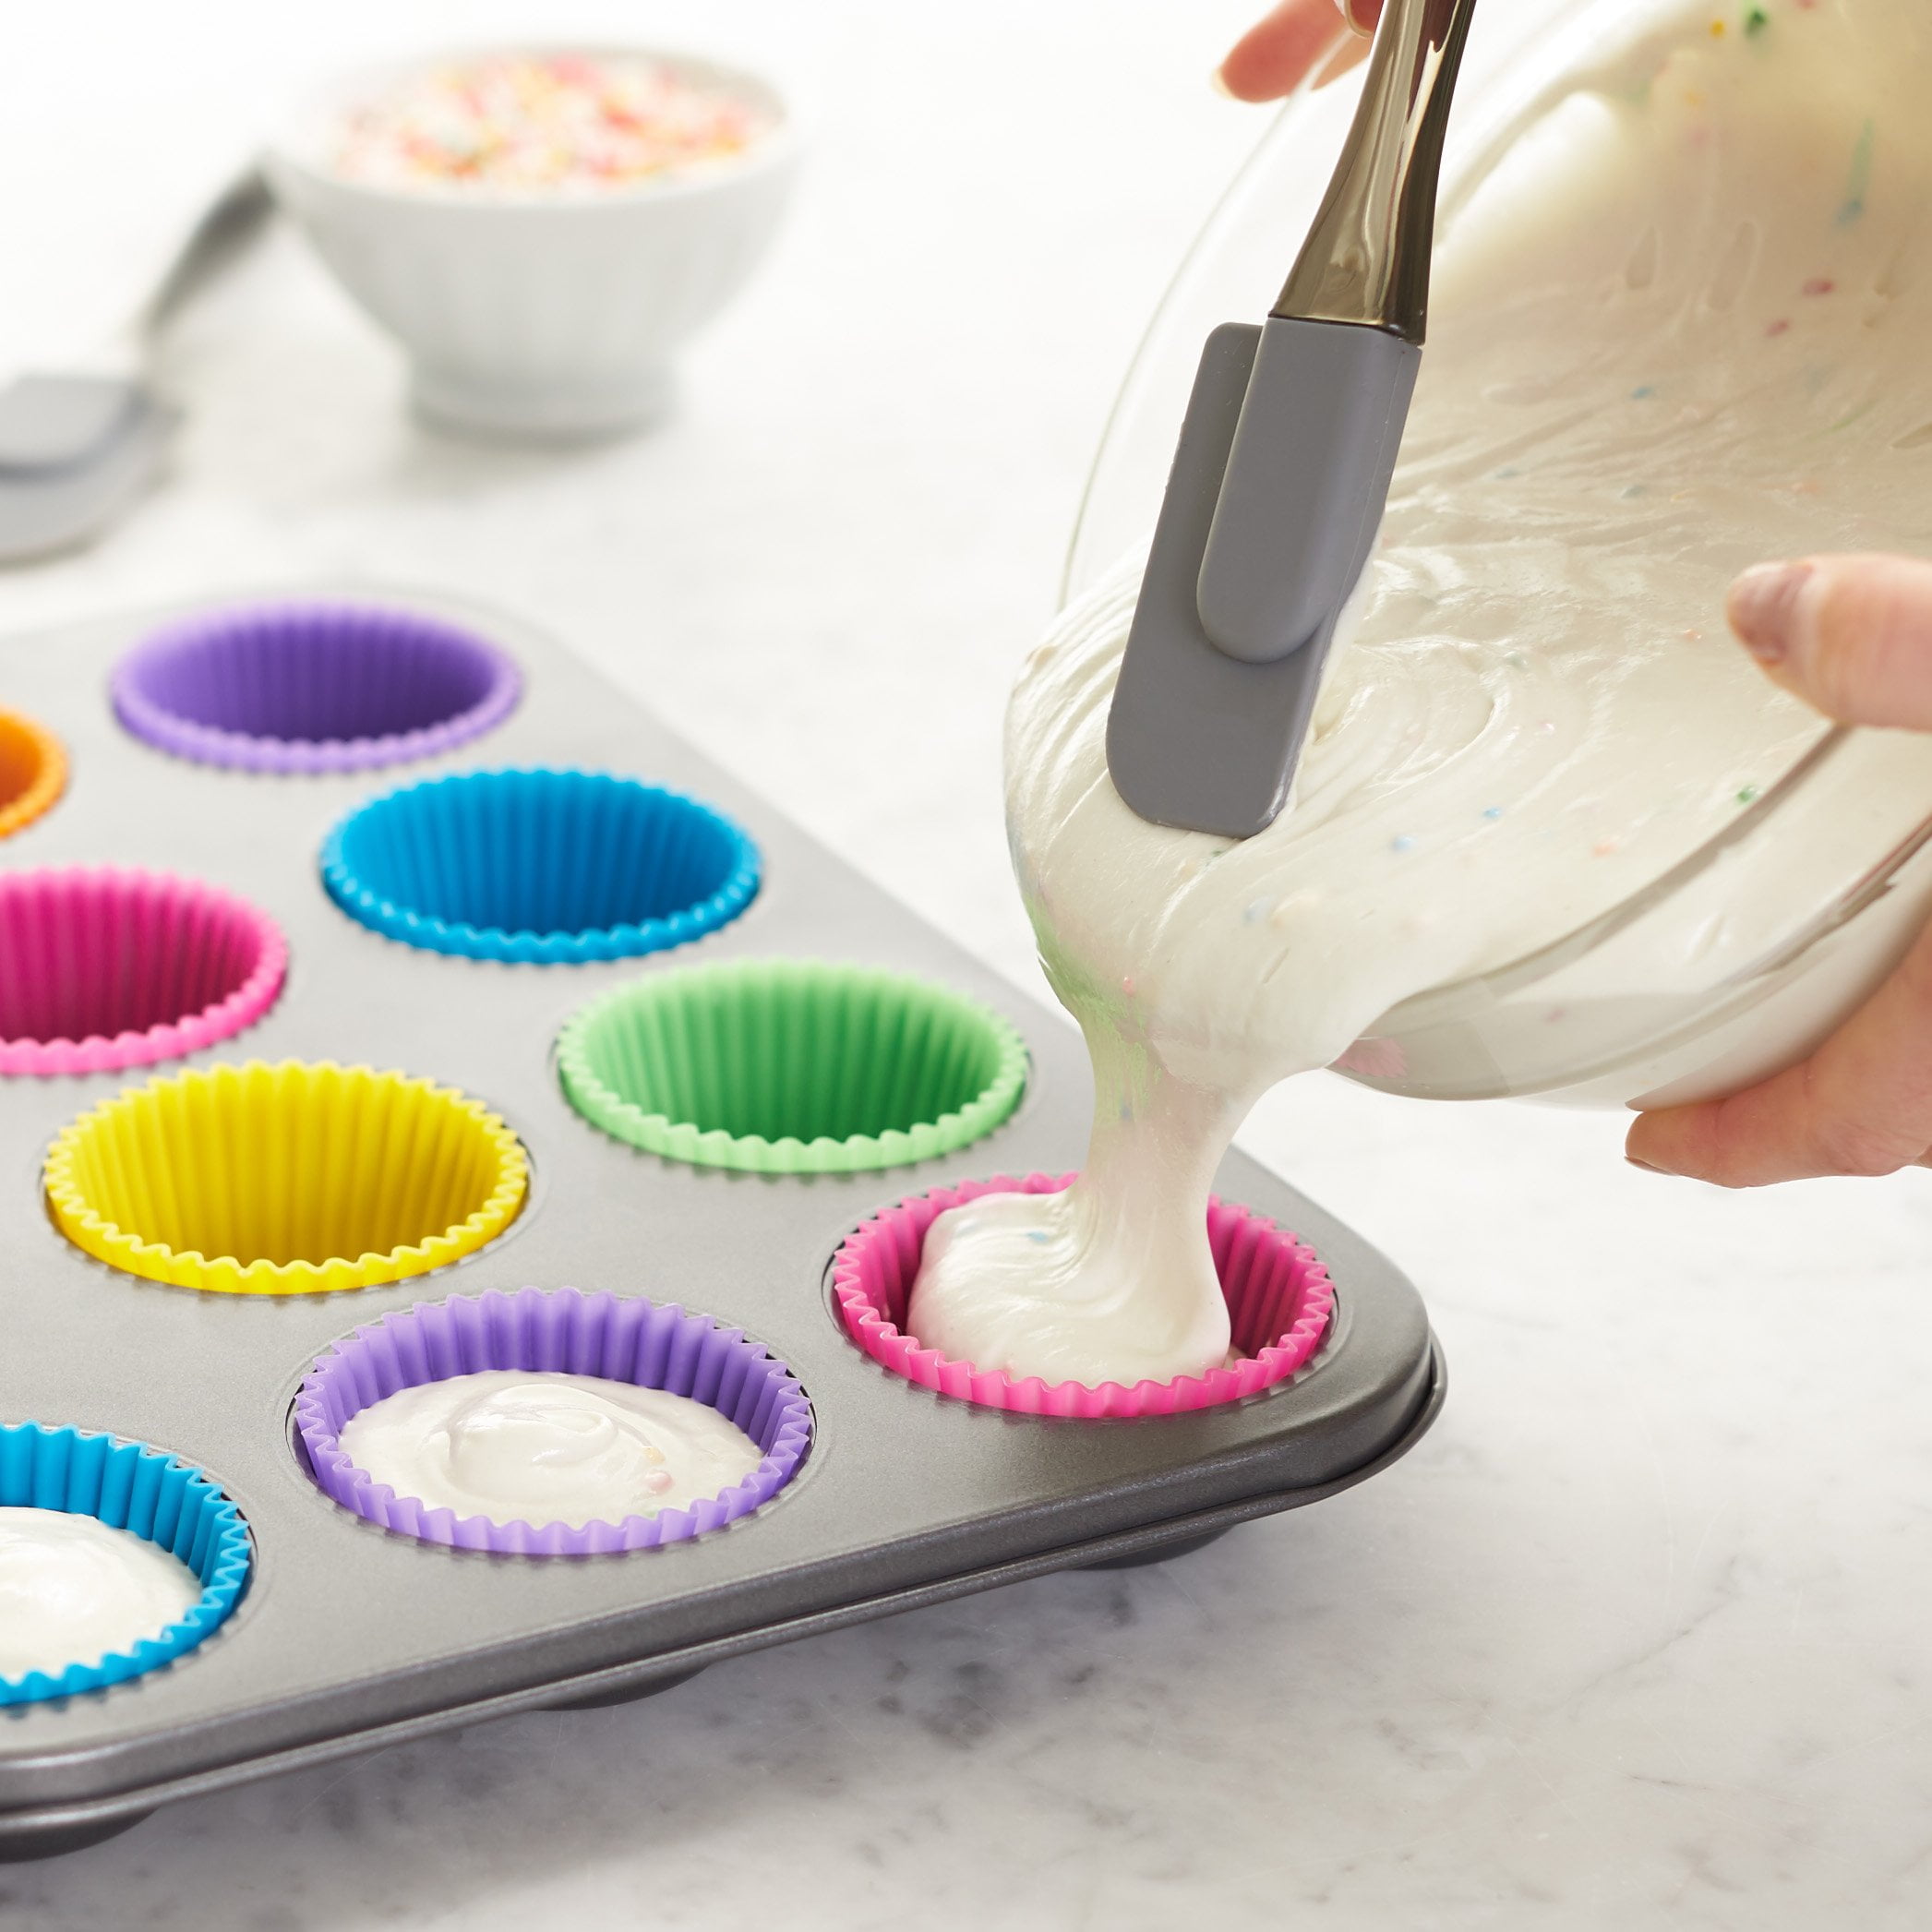  Pharamat Extra Large Silicone Cupcake Baking Cups 12 Pack, 3.54  Inch Non Stick Cupcake and Muffin Liners, Reusable Jumbo Silicone Baking  Cups Easy to Clean, Perfect for Cupcake, Muffin, Mousse: Home